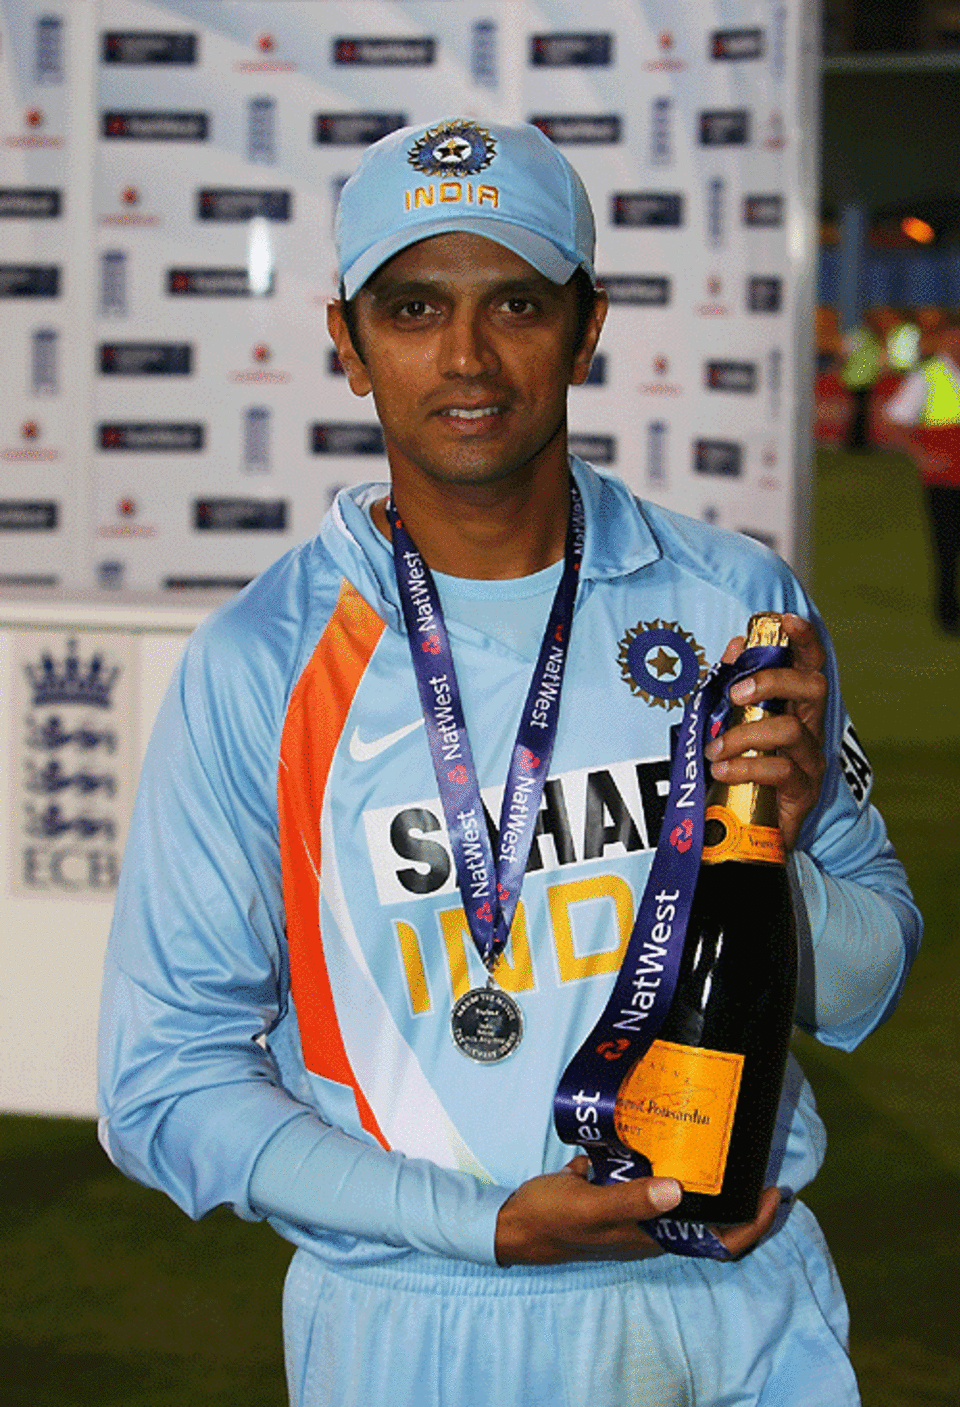 Rahul Dravid was named Man of the Match for his 63-ball 92, England v India, 2nd ODI, Bristol, August 24, 2007